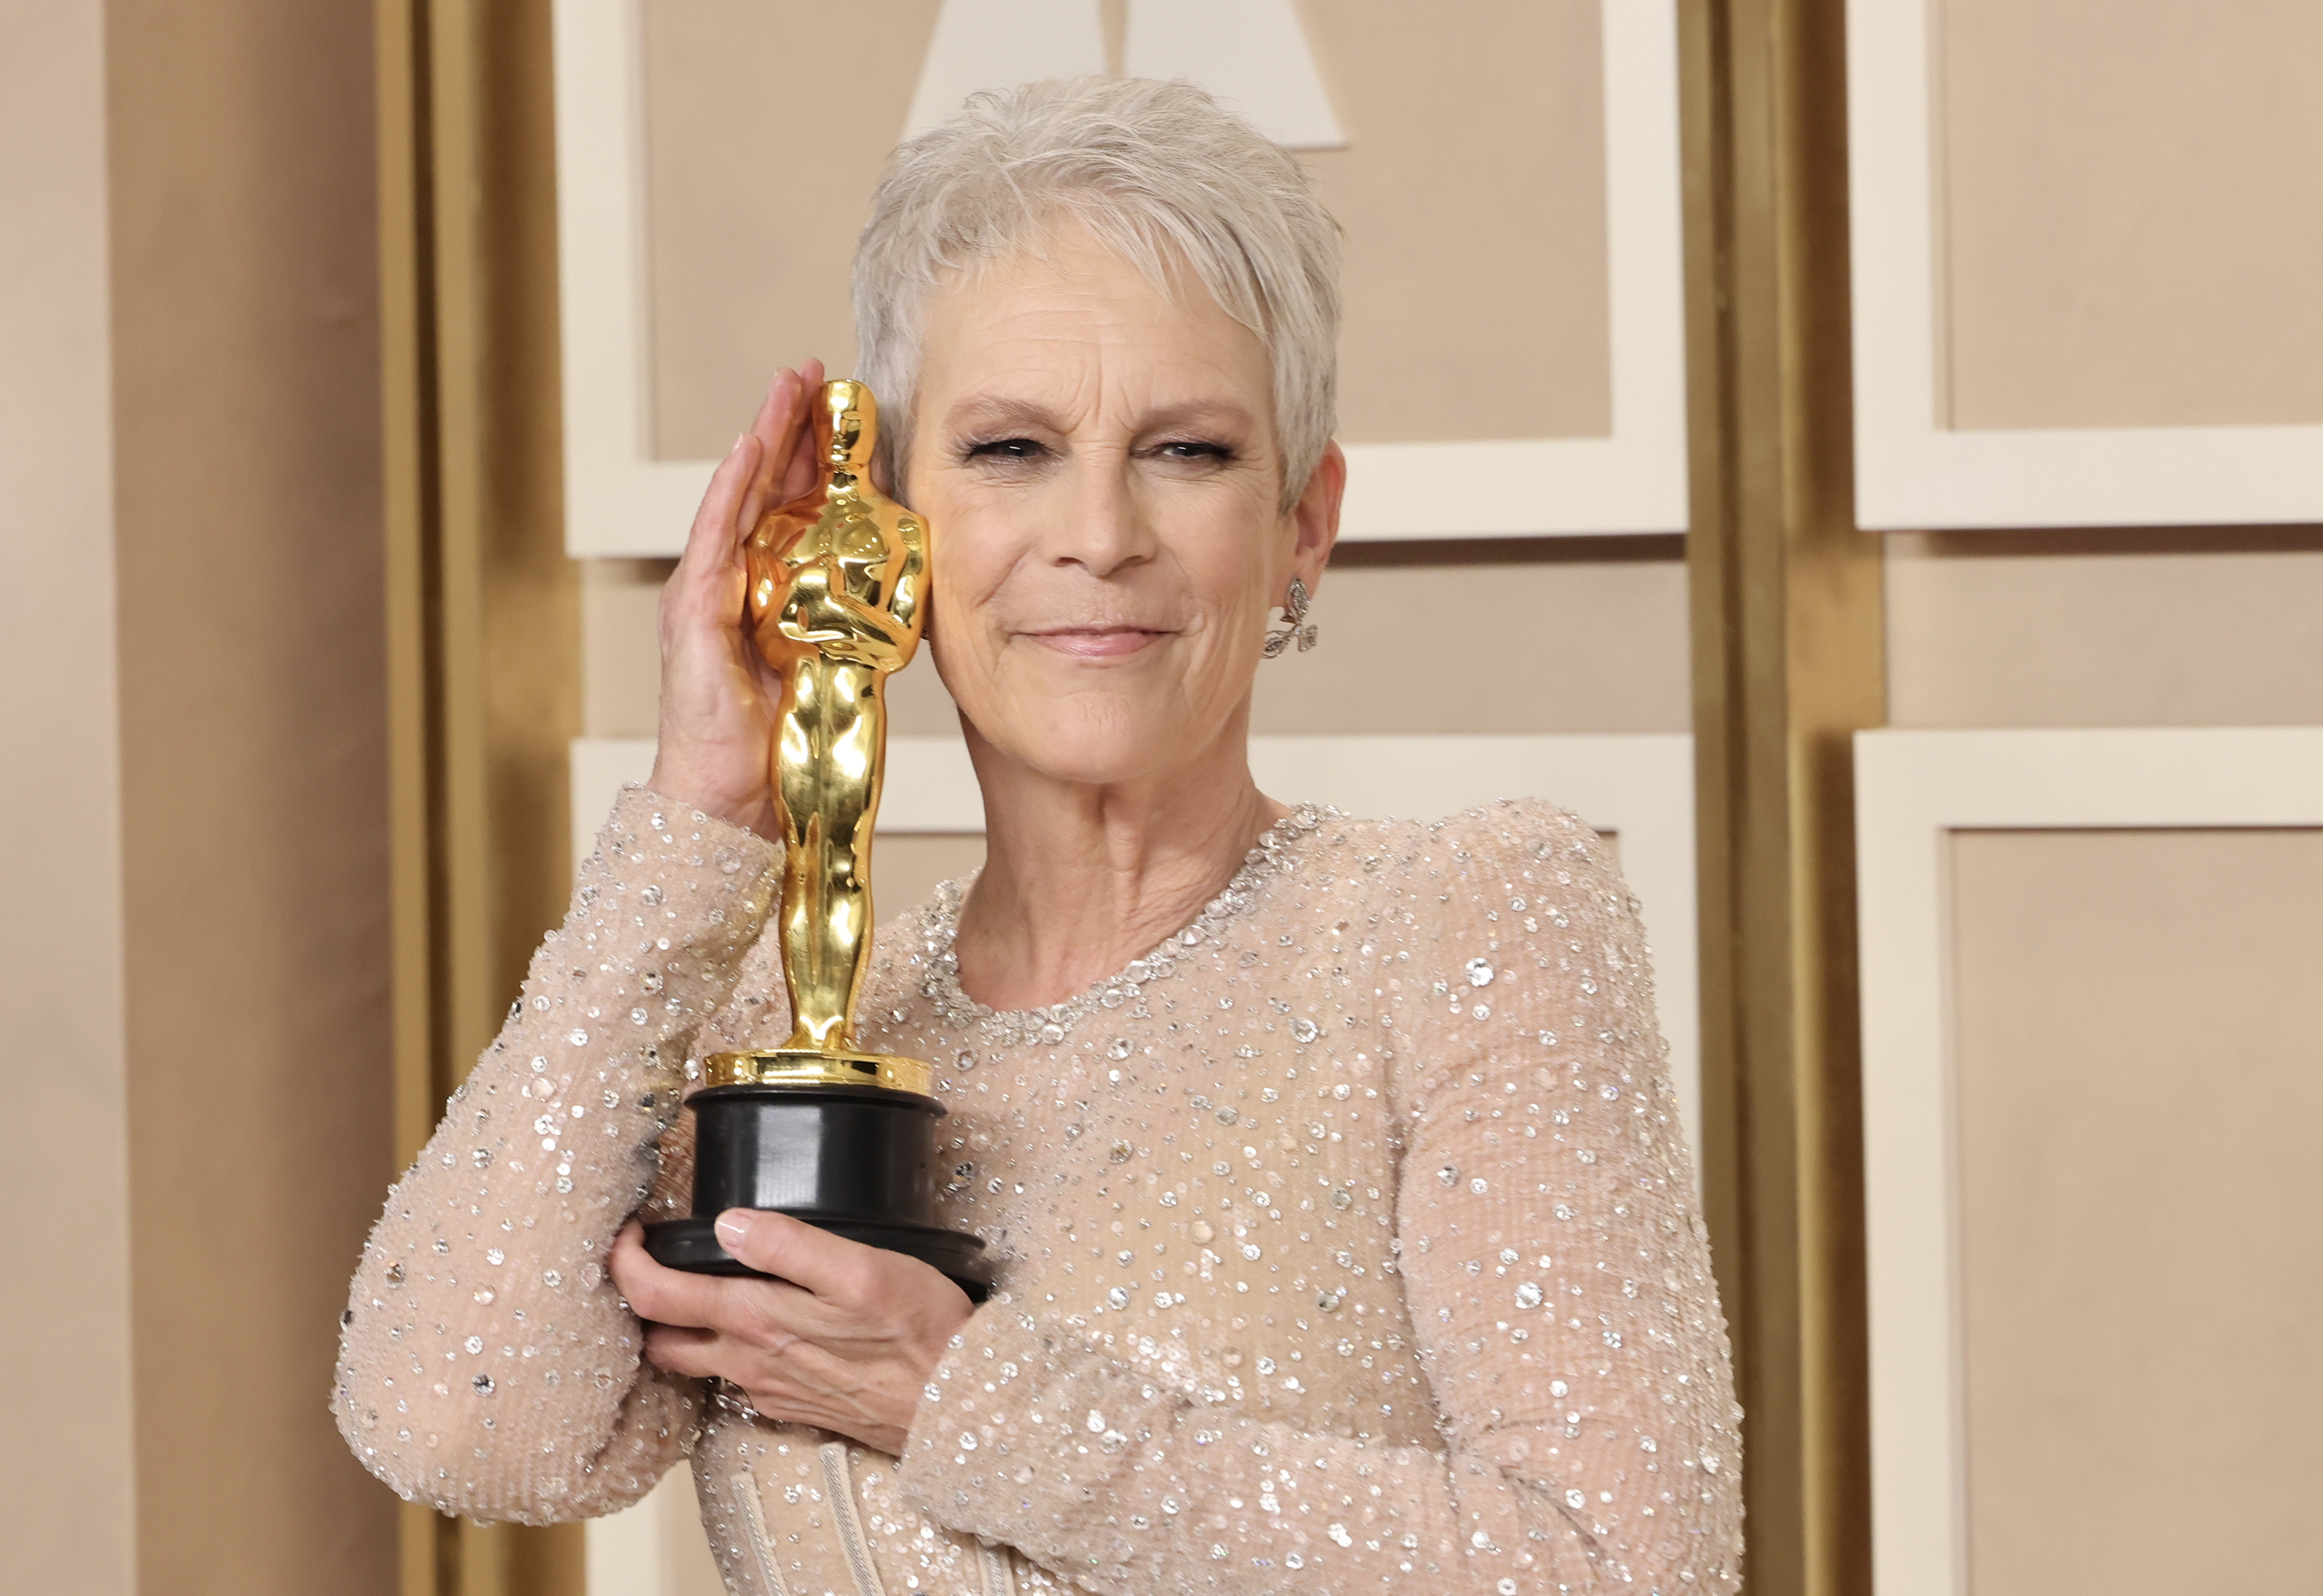 Jamie Lee Curtis in a sparkly gown posing with an Academy Award.